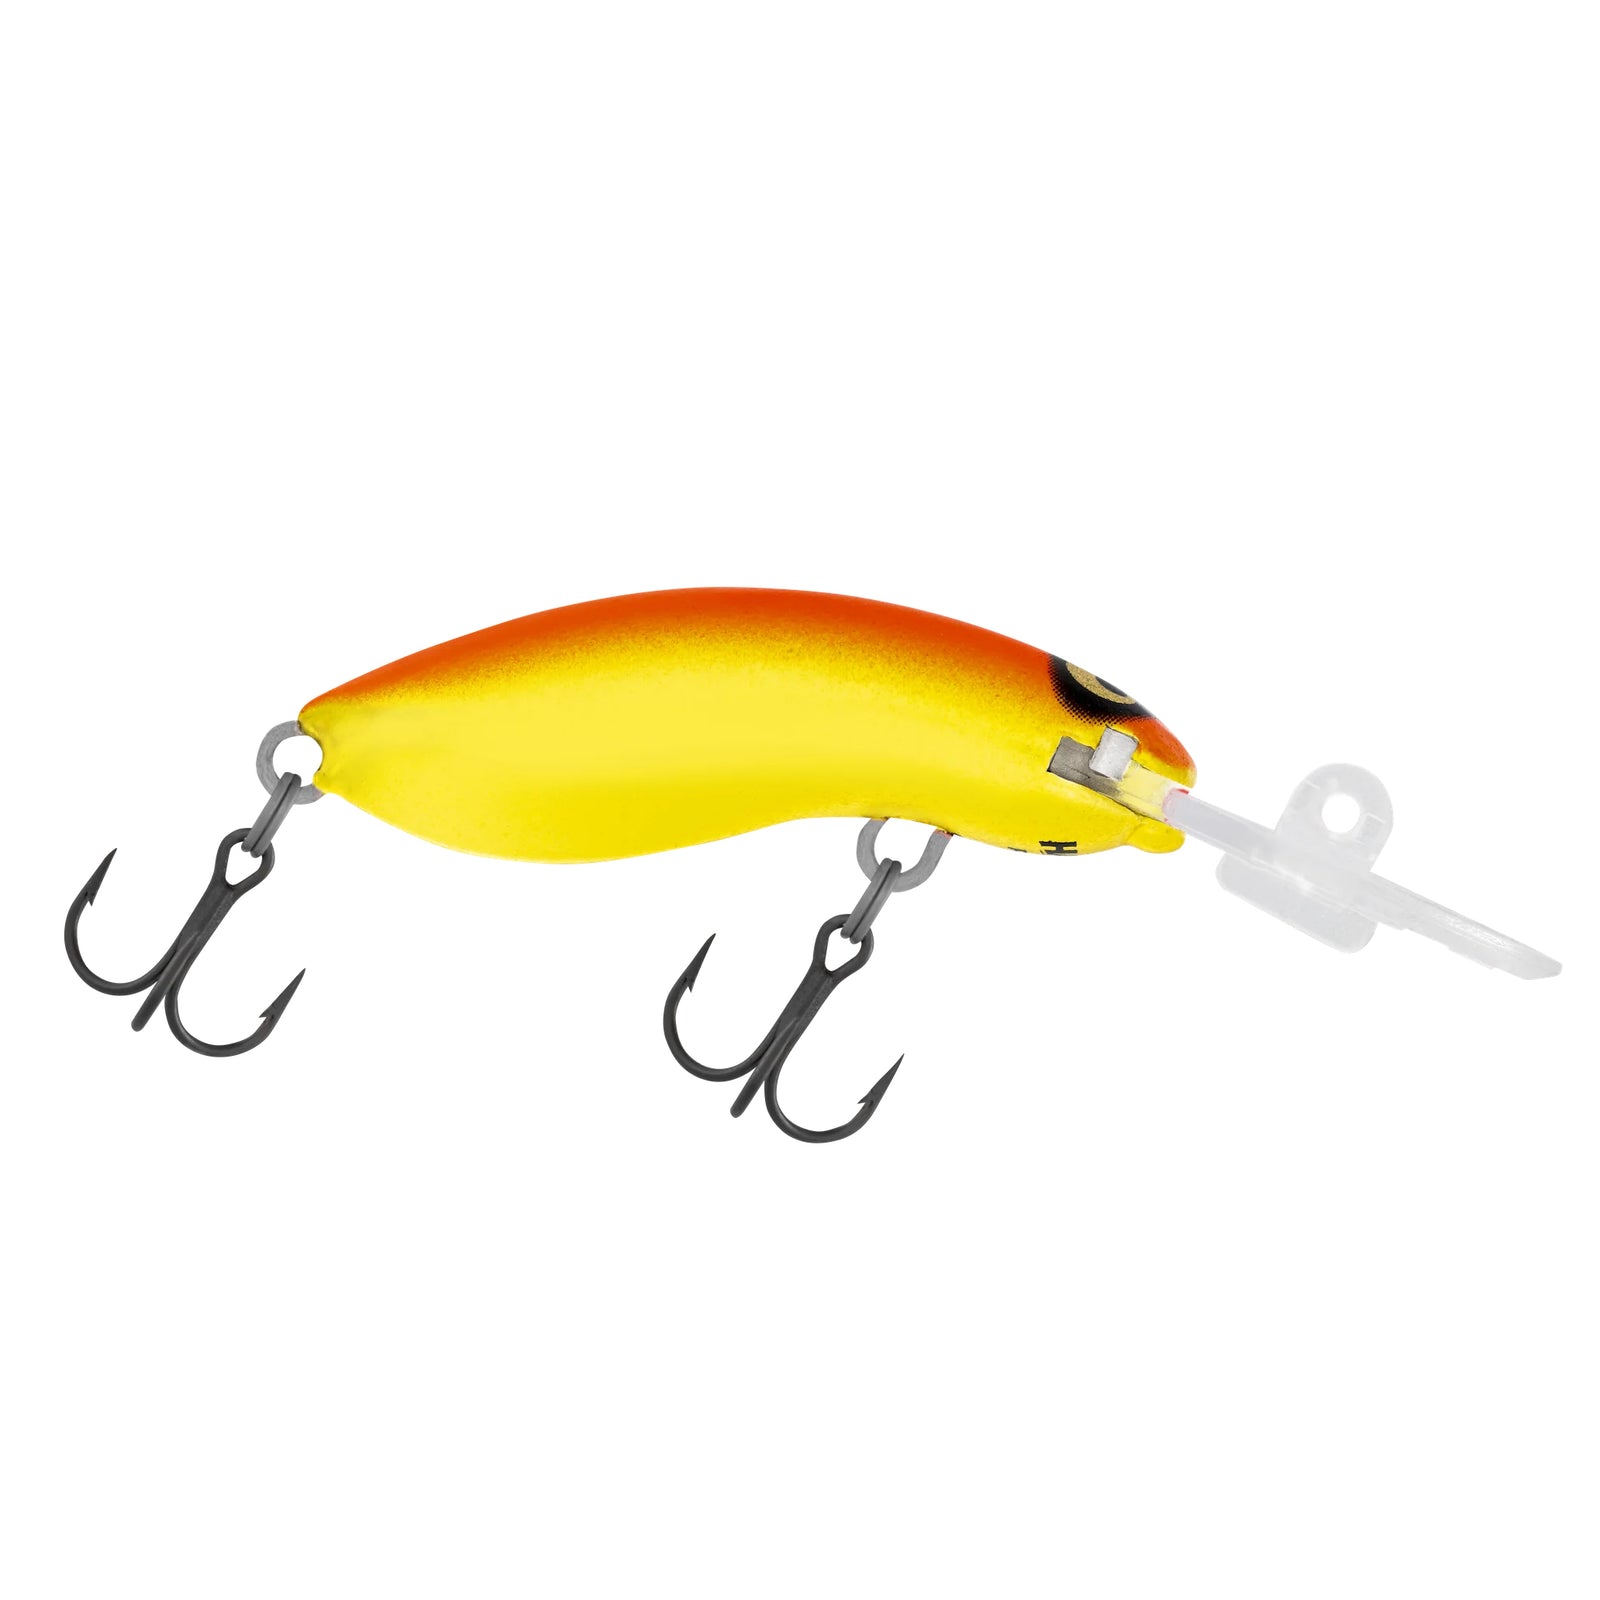 Zipbaits Rigge Raphael - Compleat Angler Nedlands Pro Tackle